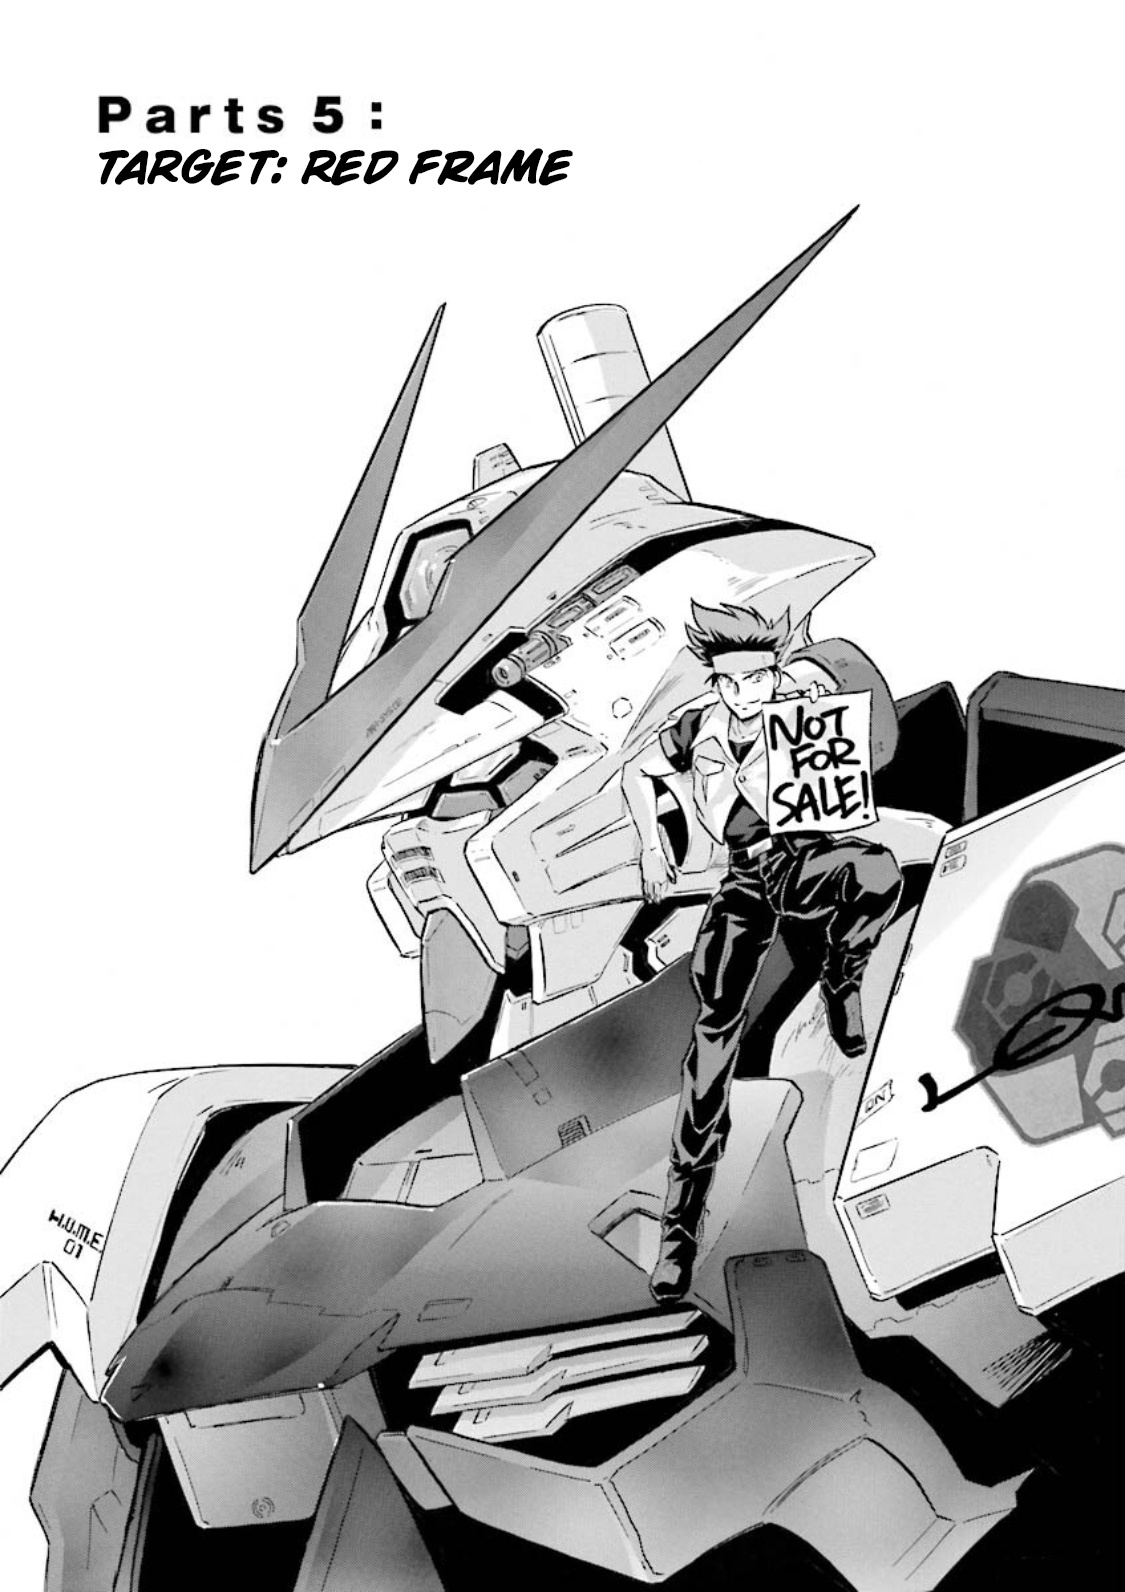 Mobile Suit Gundam Seed Astray Re:master Edition - Page 1